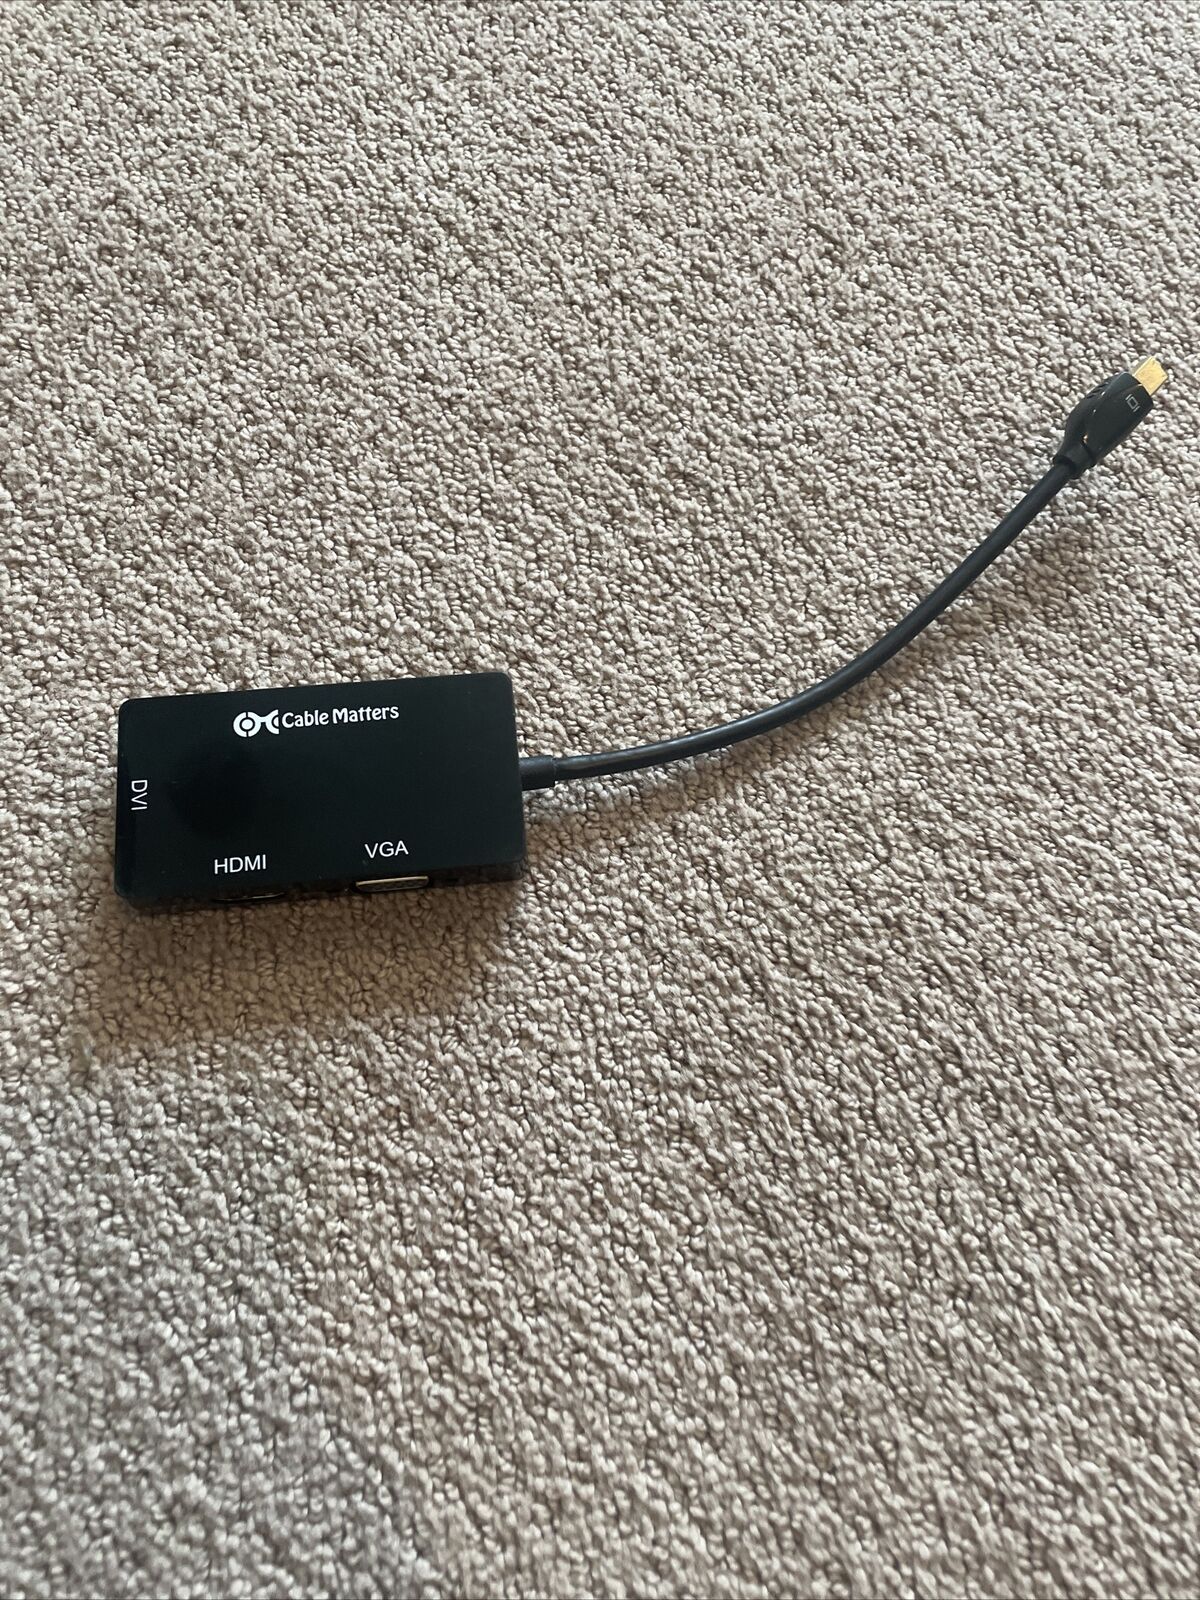 cable matters dongle hdmi to vga dvi